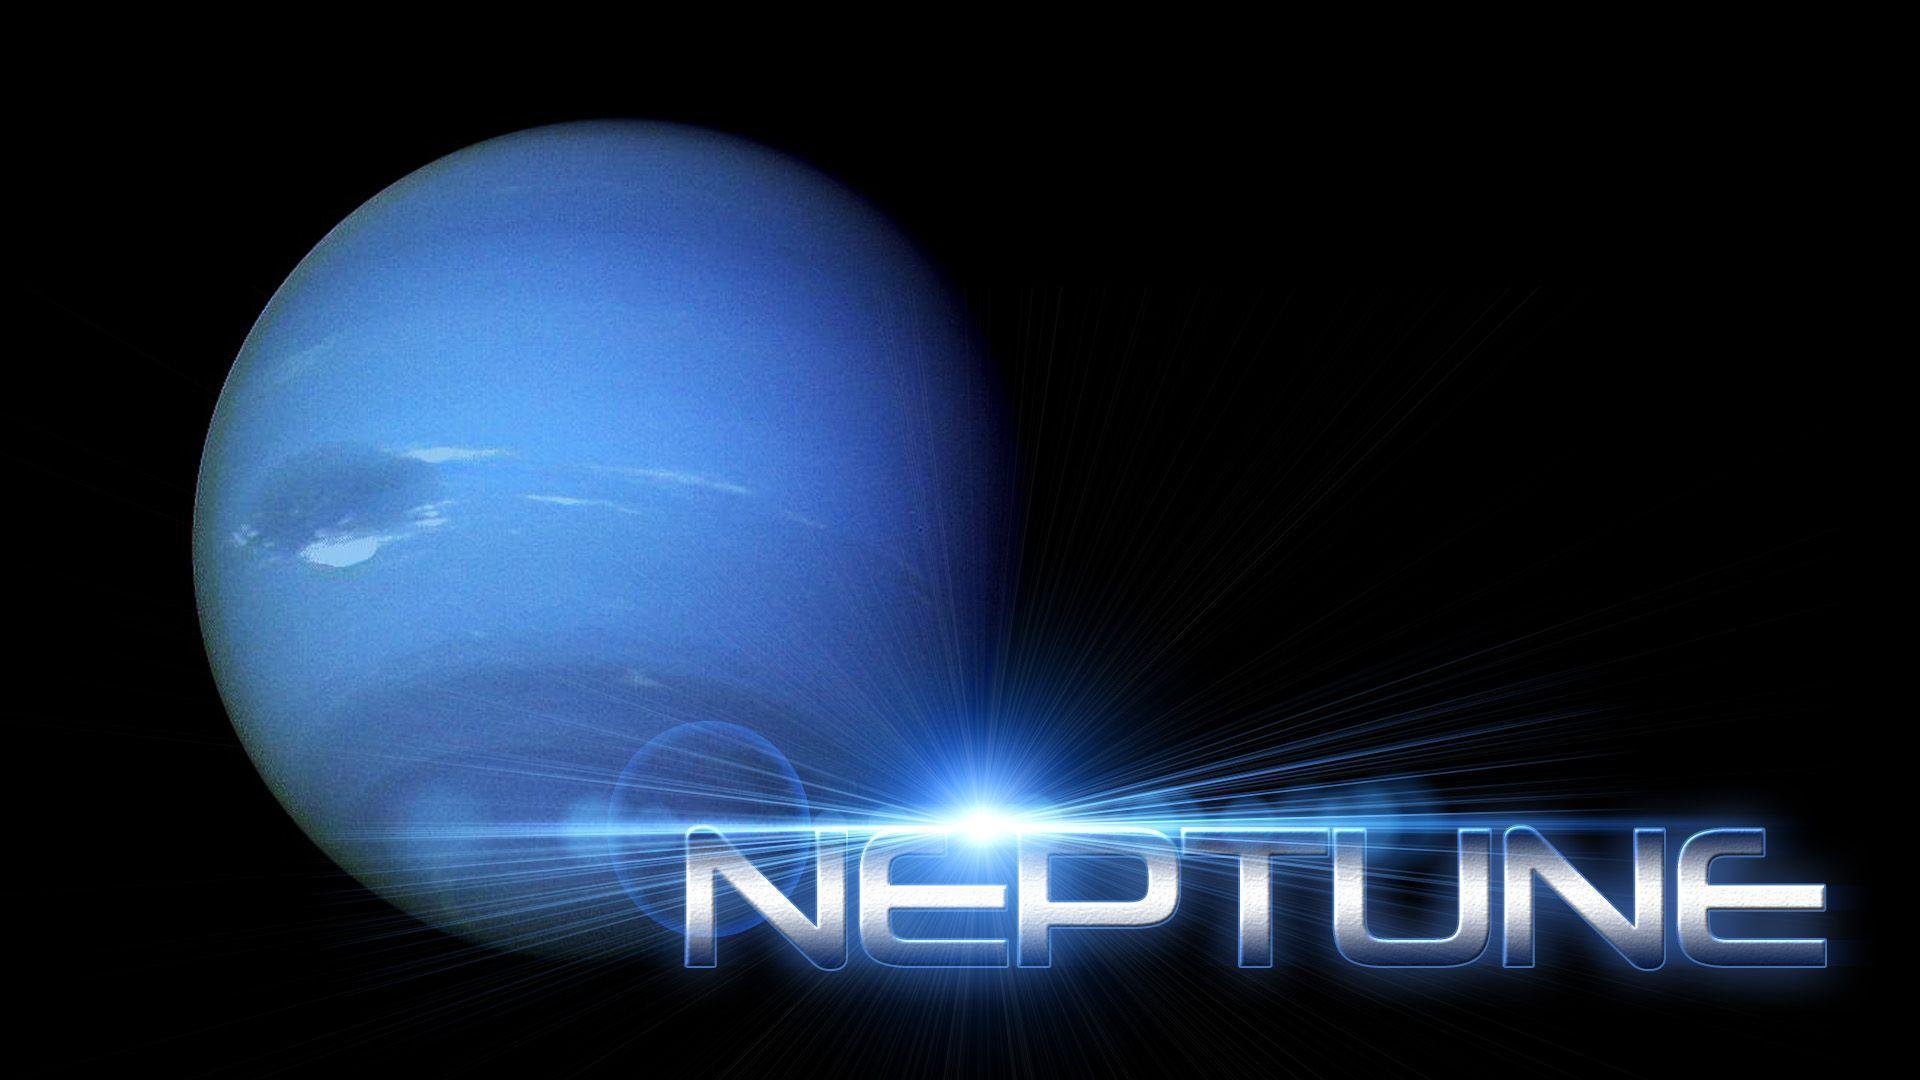 Widescreen 2K Wallpapers of Neptune for Windows and Mac Systems